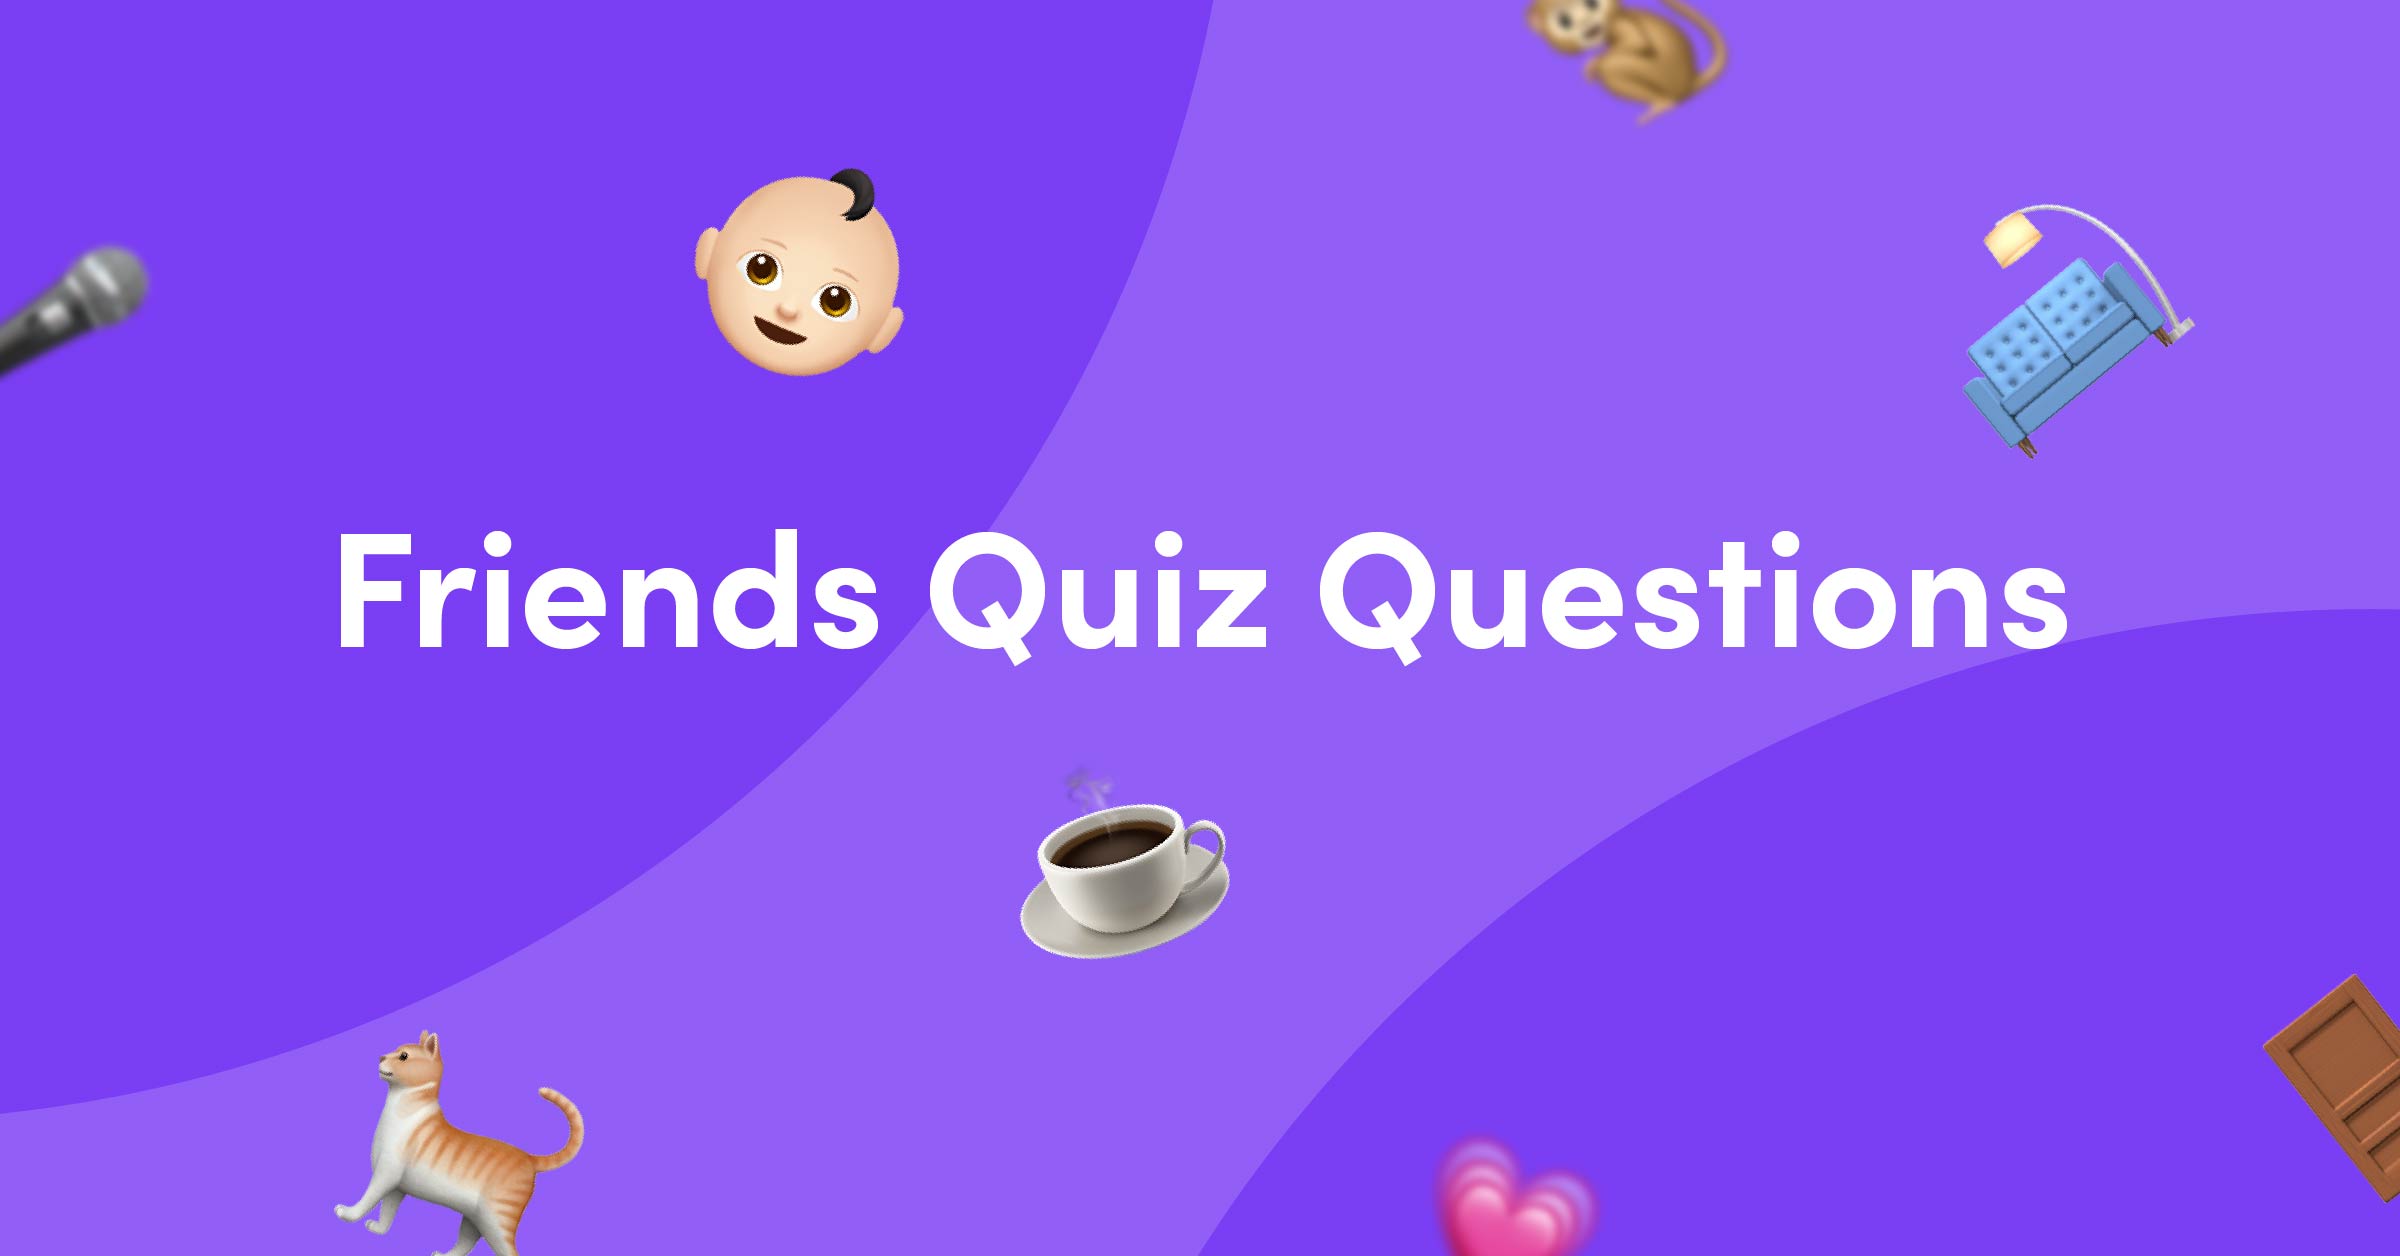 Emojis for Friends TV show on purple background for Friends quiz questions and answers